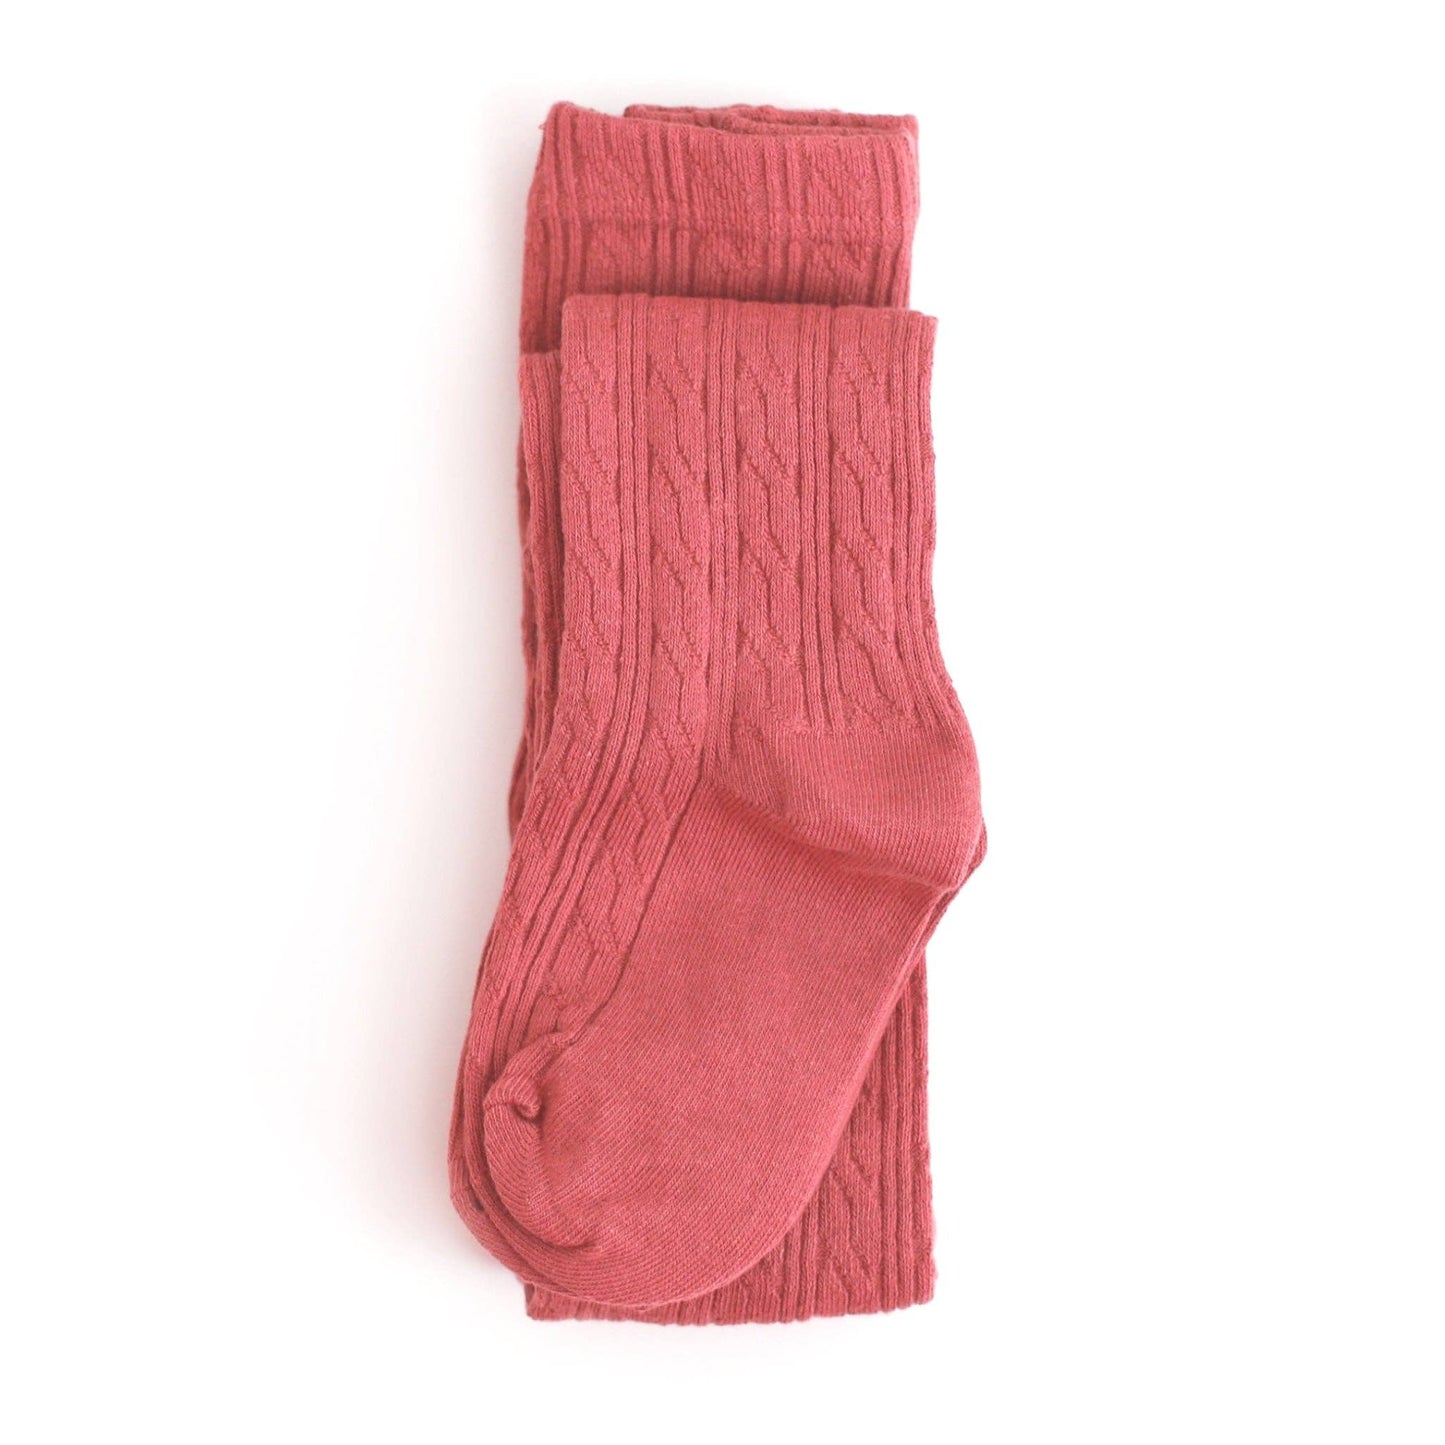 Strawberry Cable Knit Tights: 5-6 YEARS